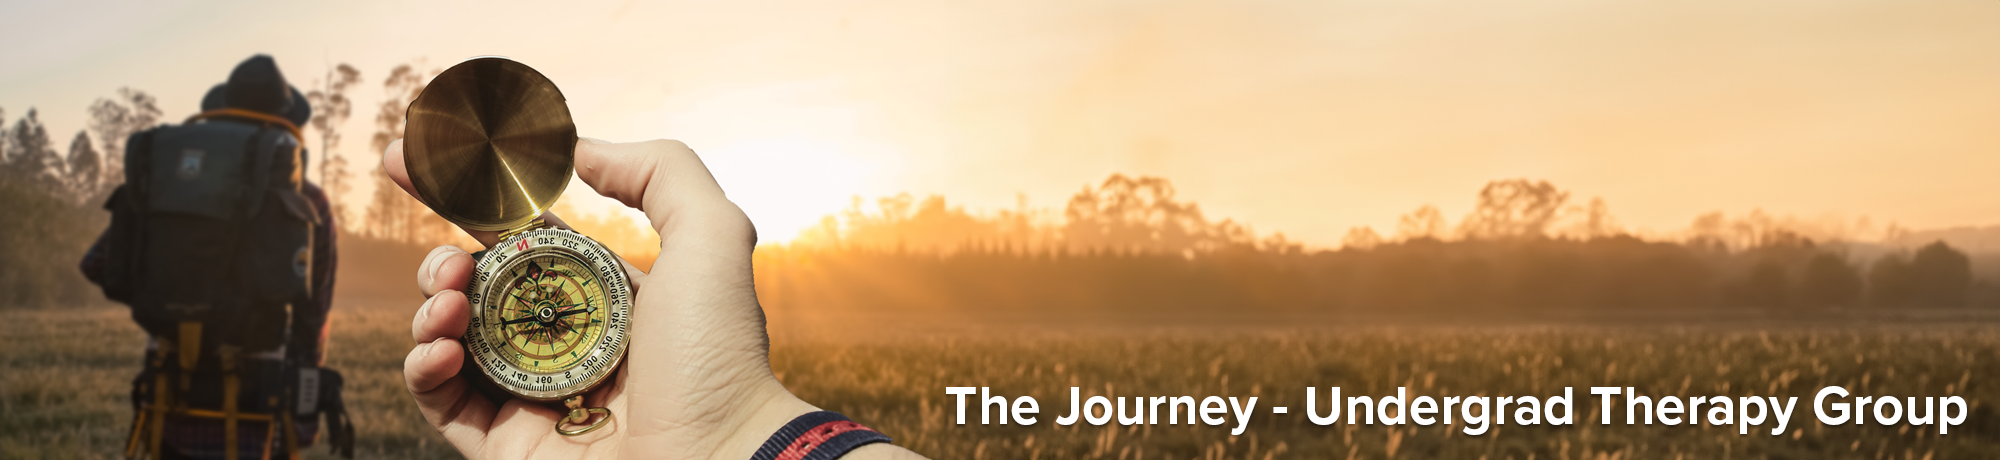 The Journey - Undergrad Therapy Group Banner